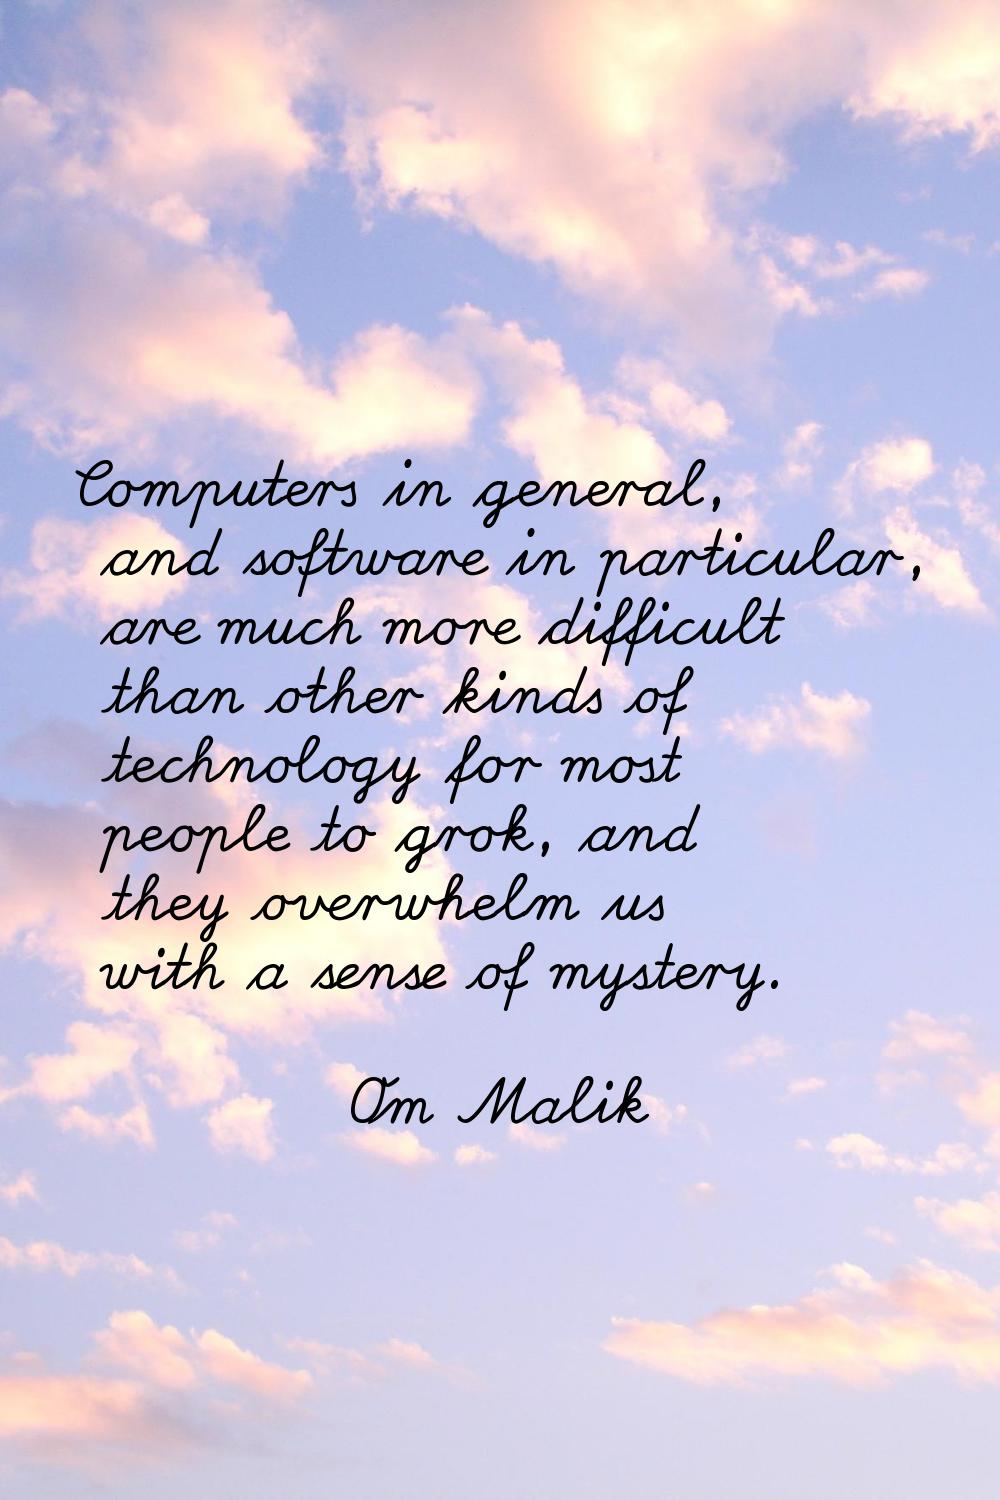 Computers in general, and software in particular, are much more difficult than other kinds of techn